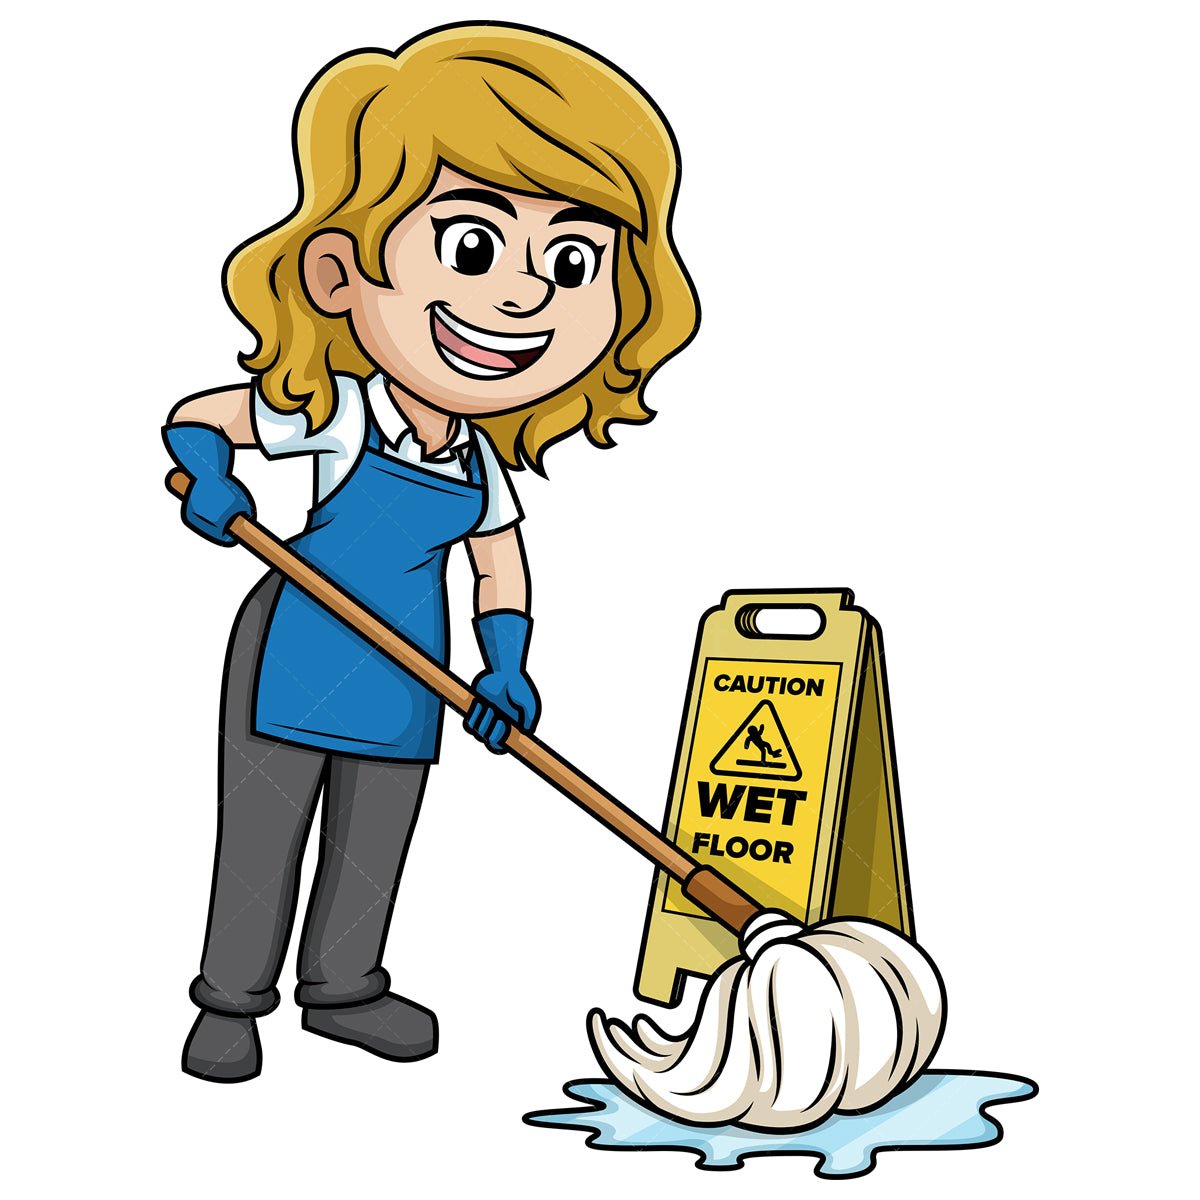 Royalty-free stock vector illustration of a woman mopping the floor.